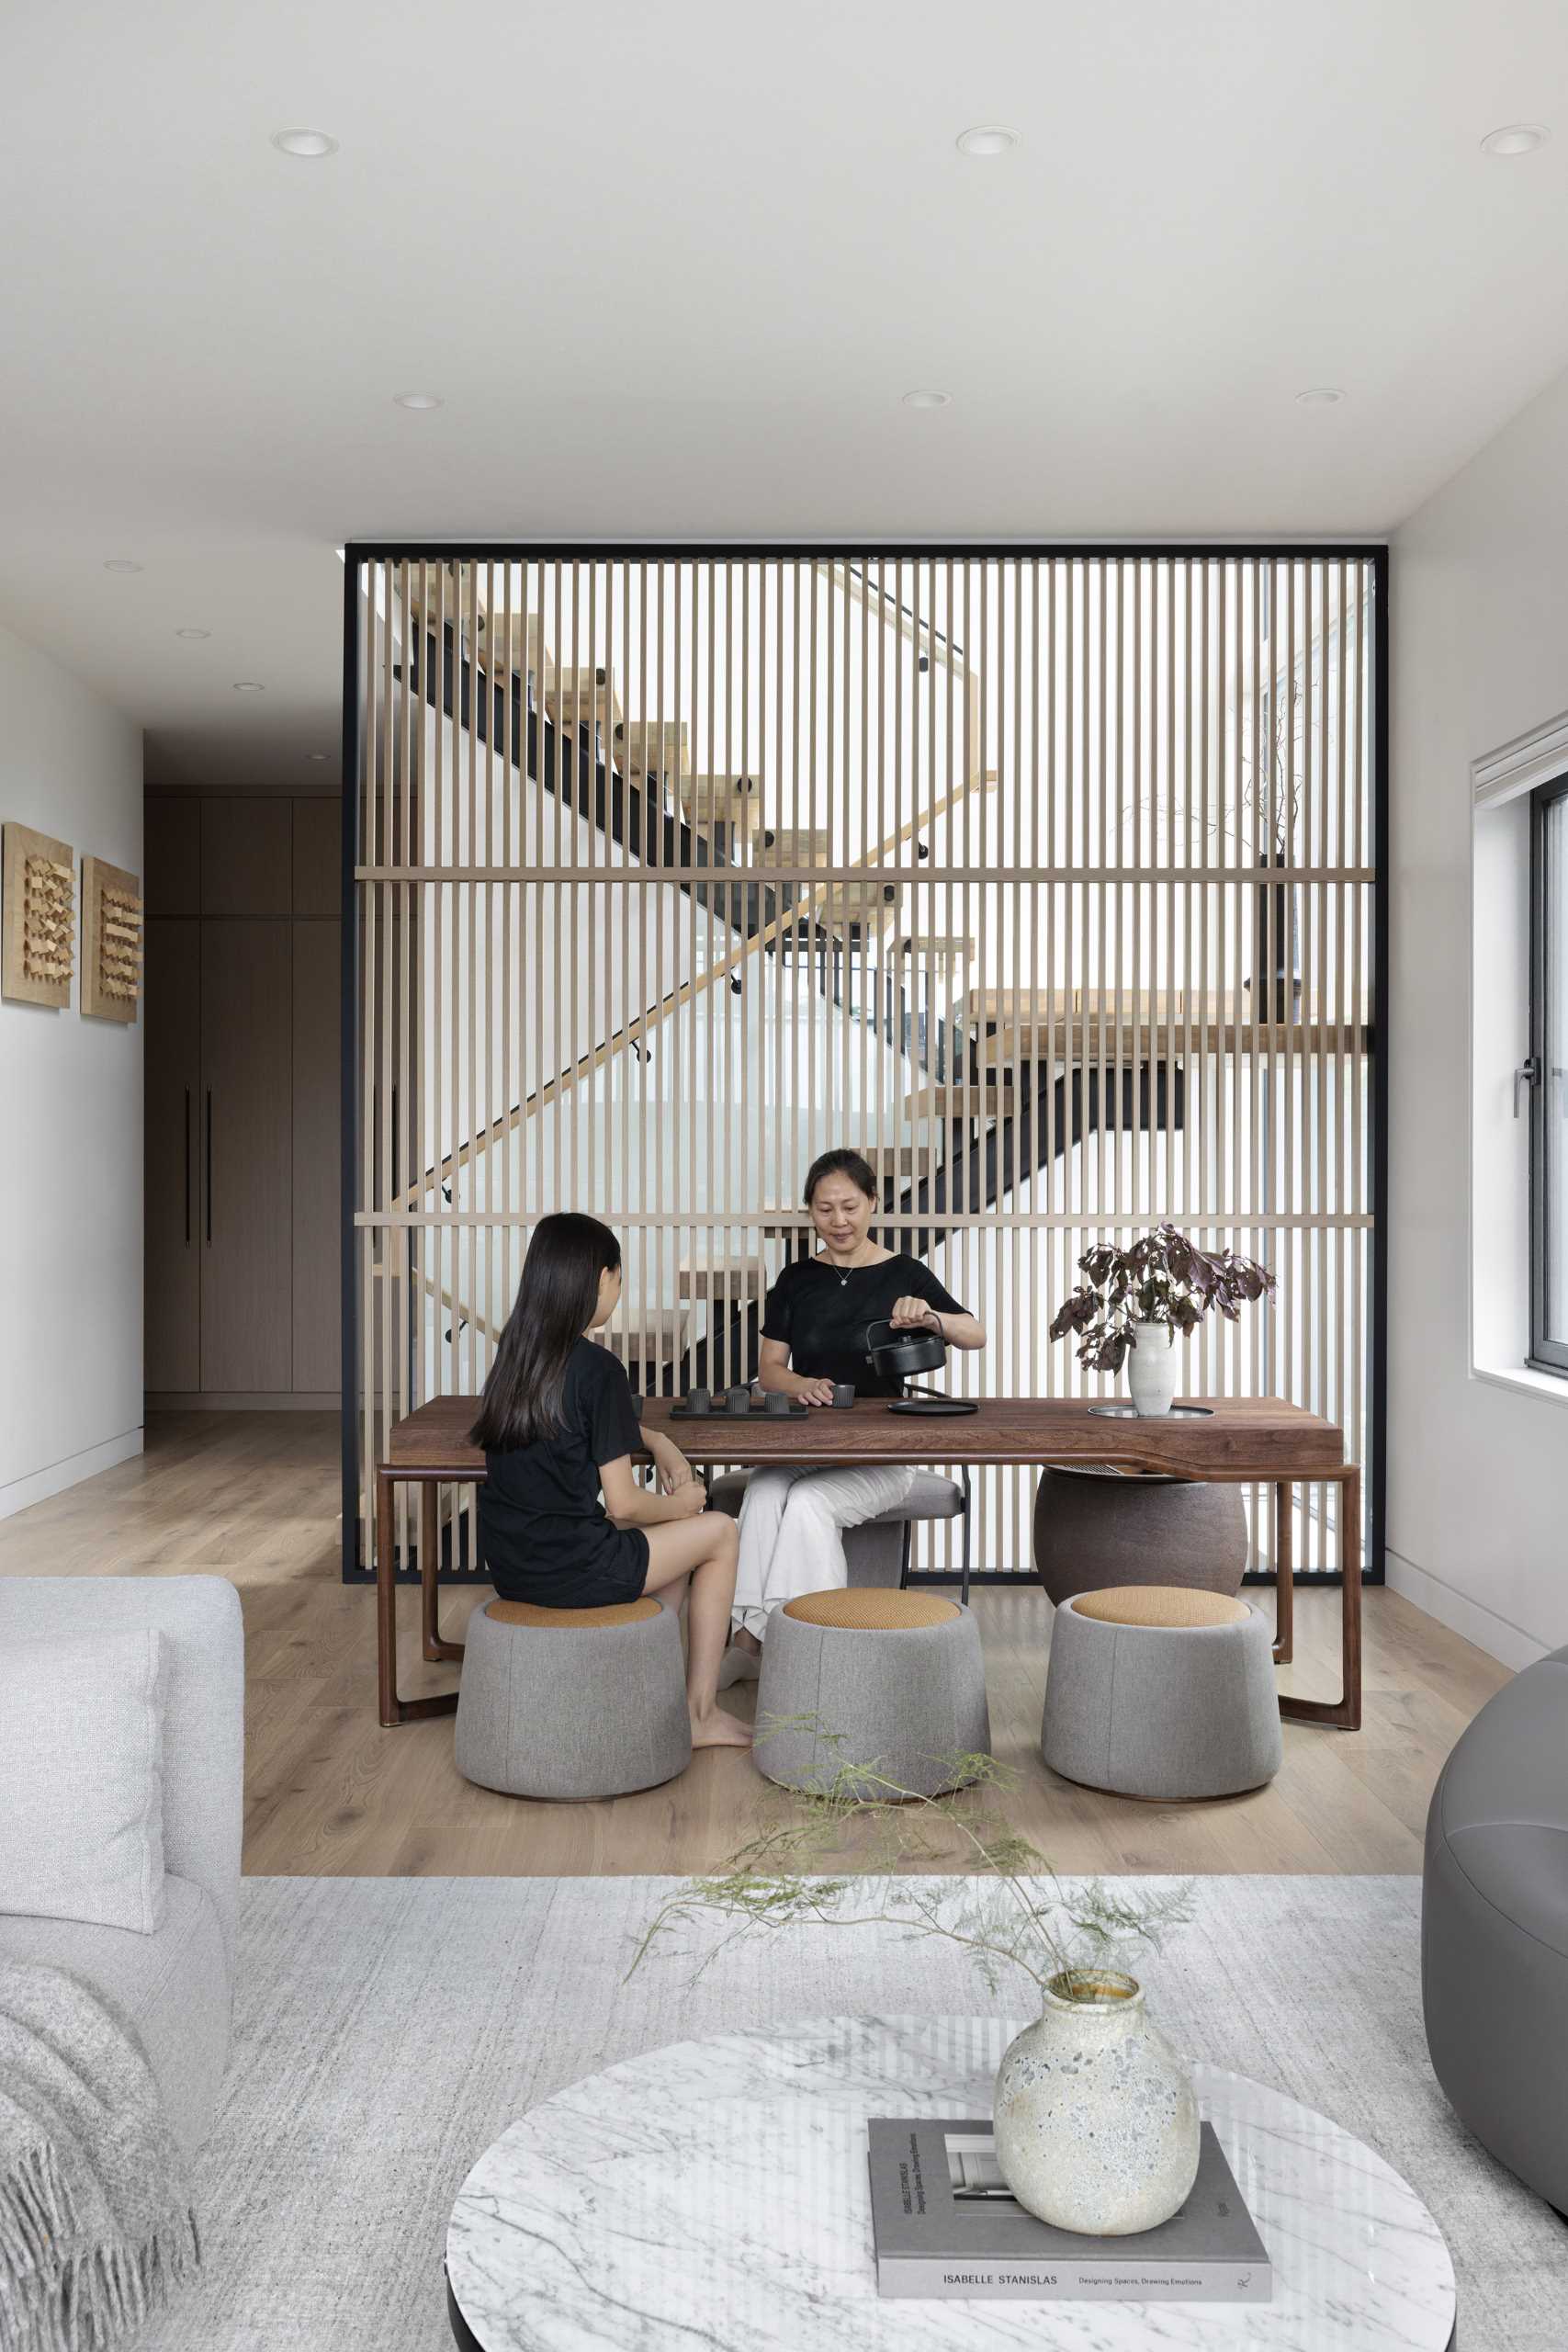 A modern home with a designated tea drinking area.